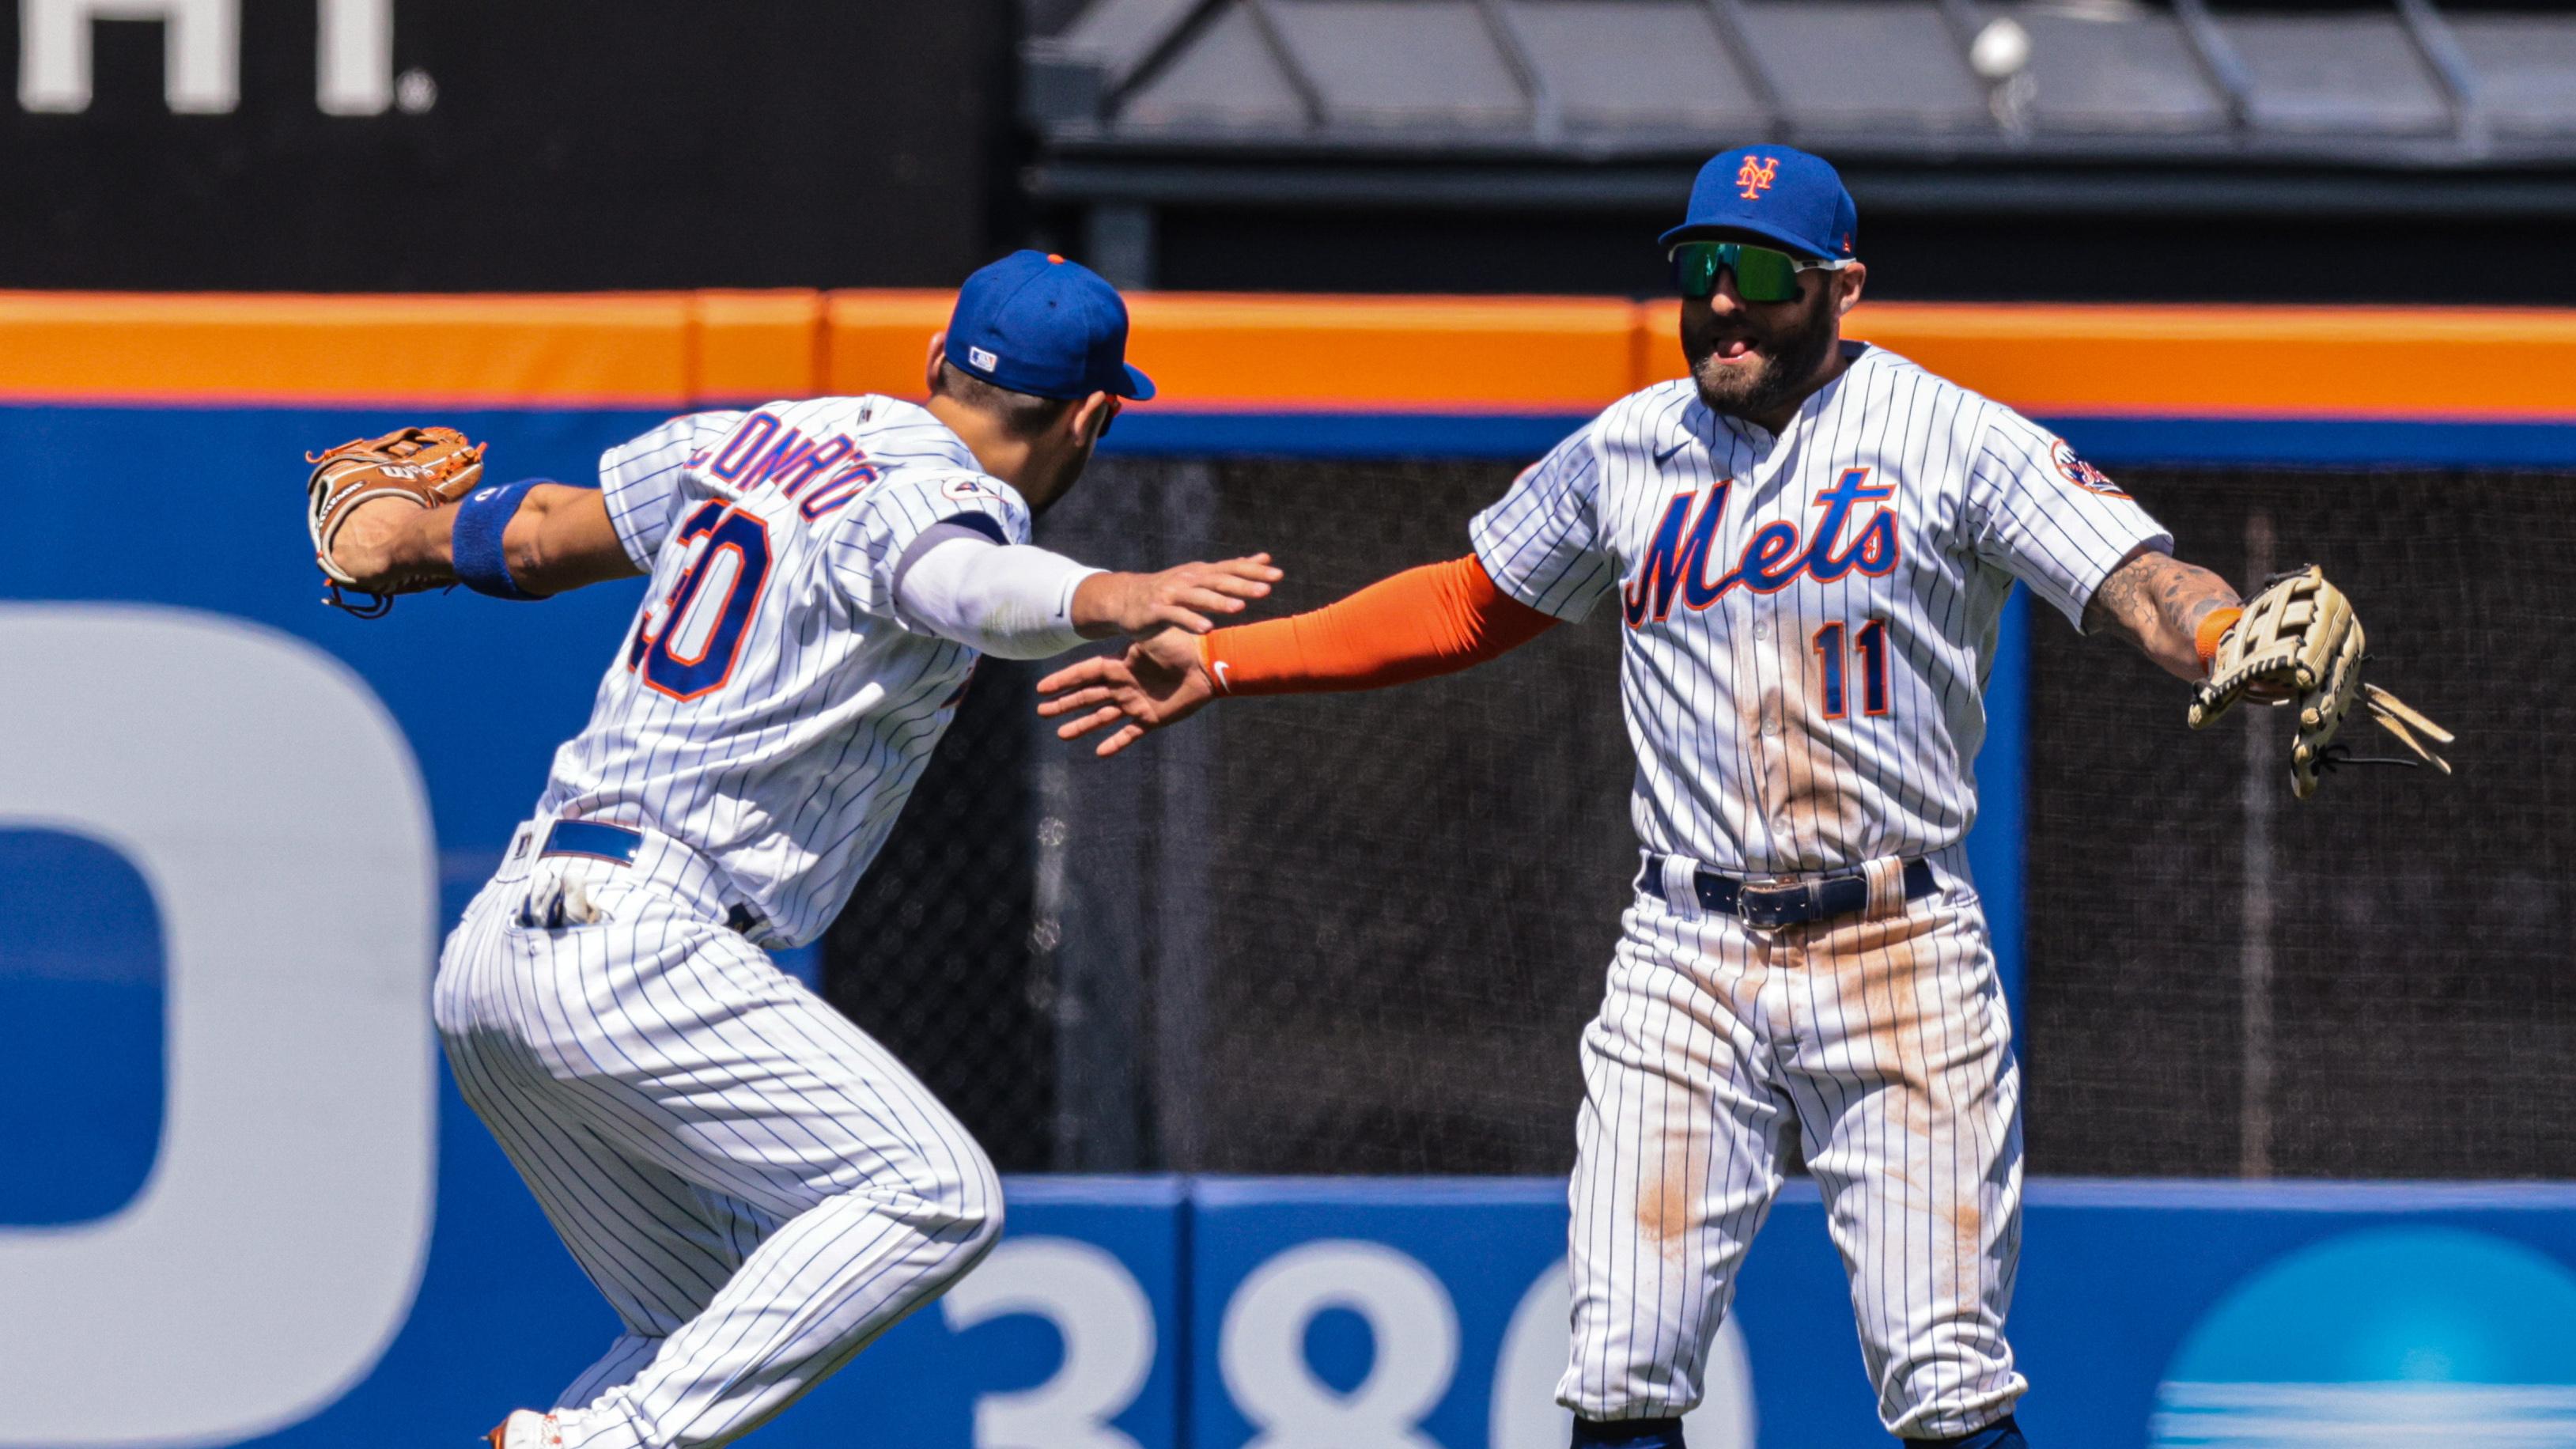 New York Mets center fielder Kevin Pillar (11) celebrates with right fielder Michael Conforto (30) after their game against the Baltimore Orioles at Citi Field. / Vincent Carchietta-USA TODAY Sports